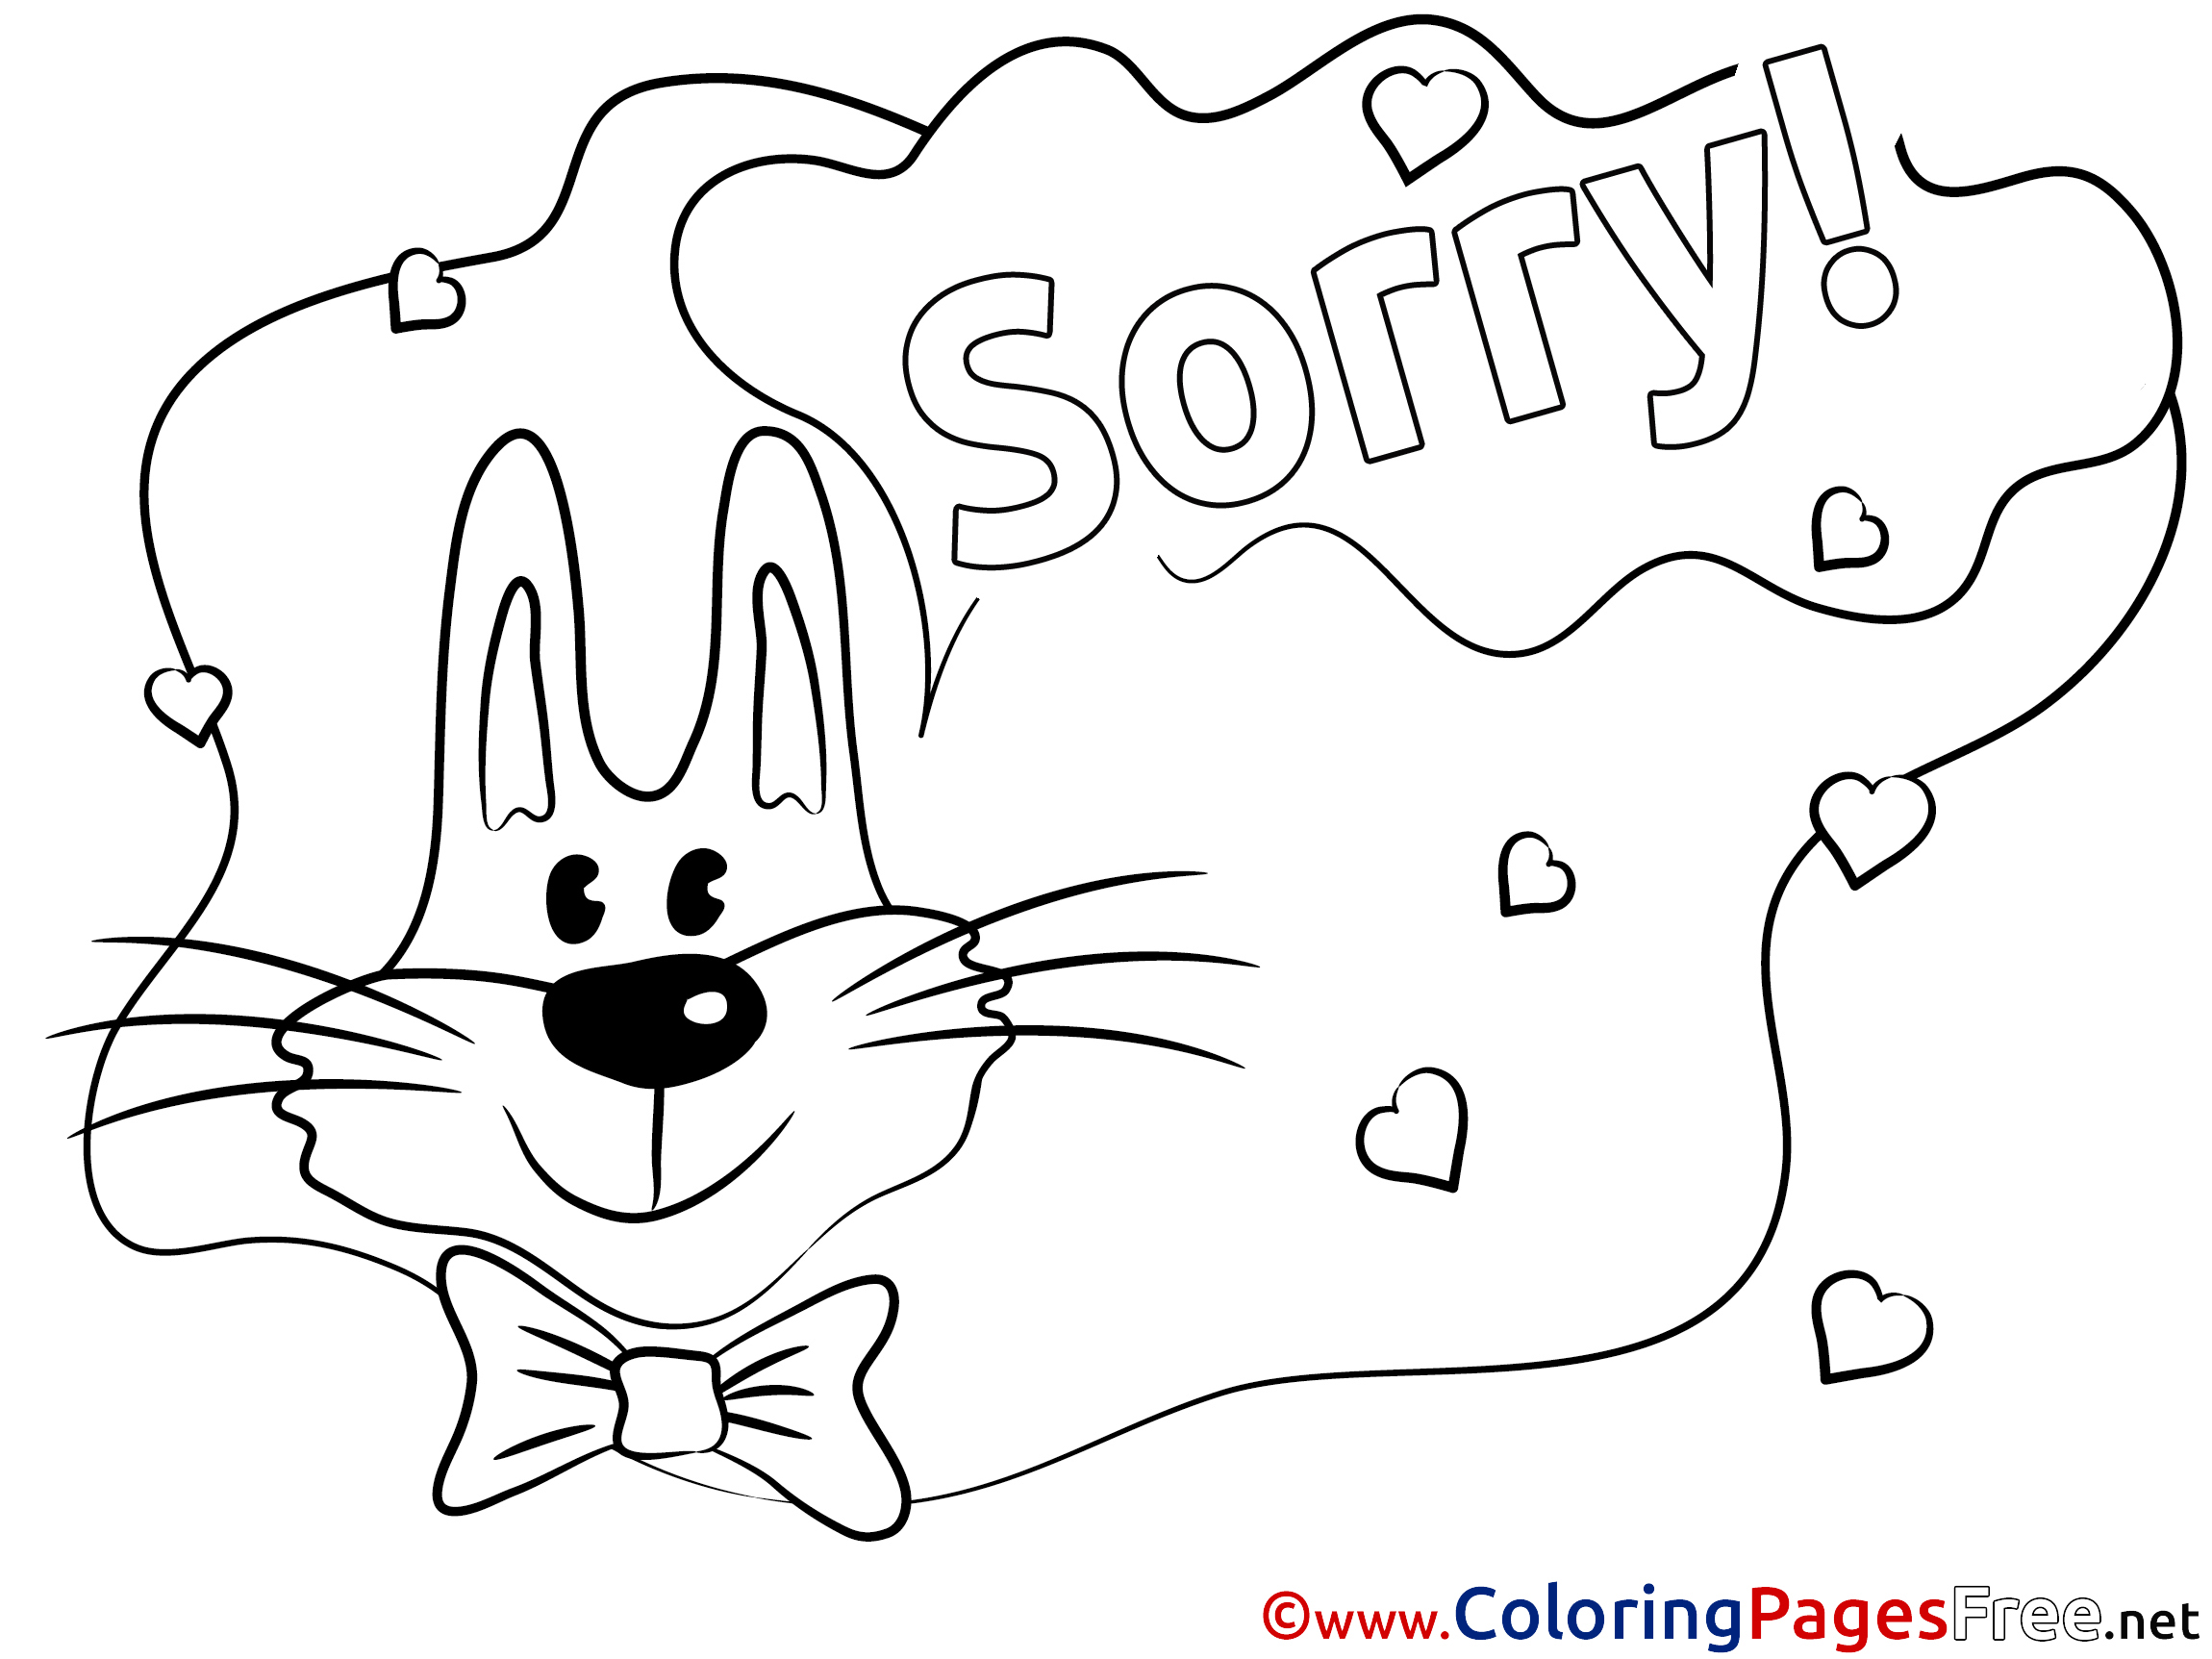 i-m-sorry-printable-coloring-pages-redemptio-n